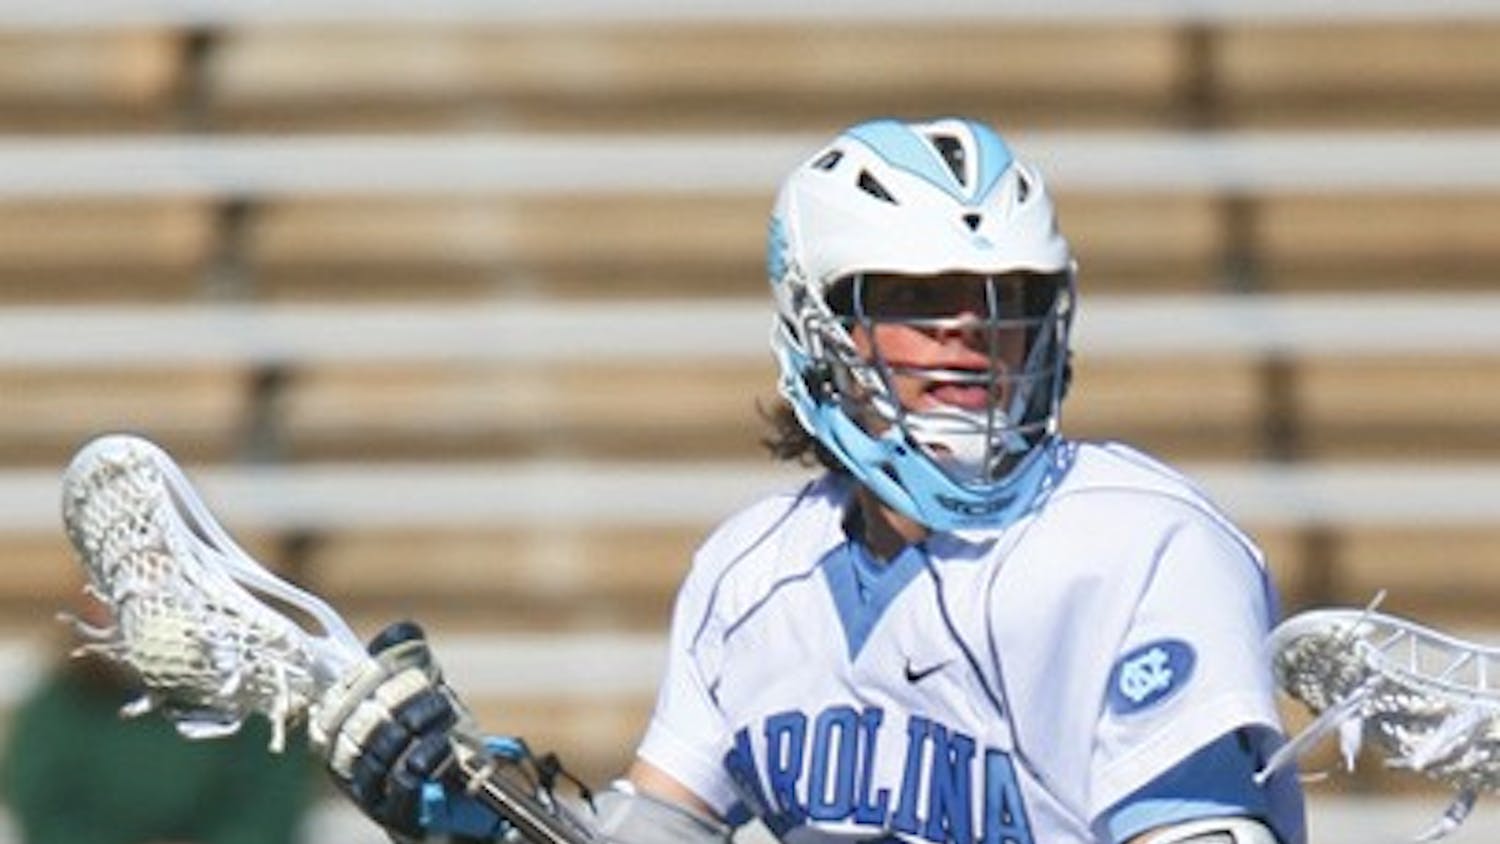 All-American Billy Bitter had a team-high six points against Lehigh. DTH/BJ Dworak